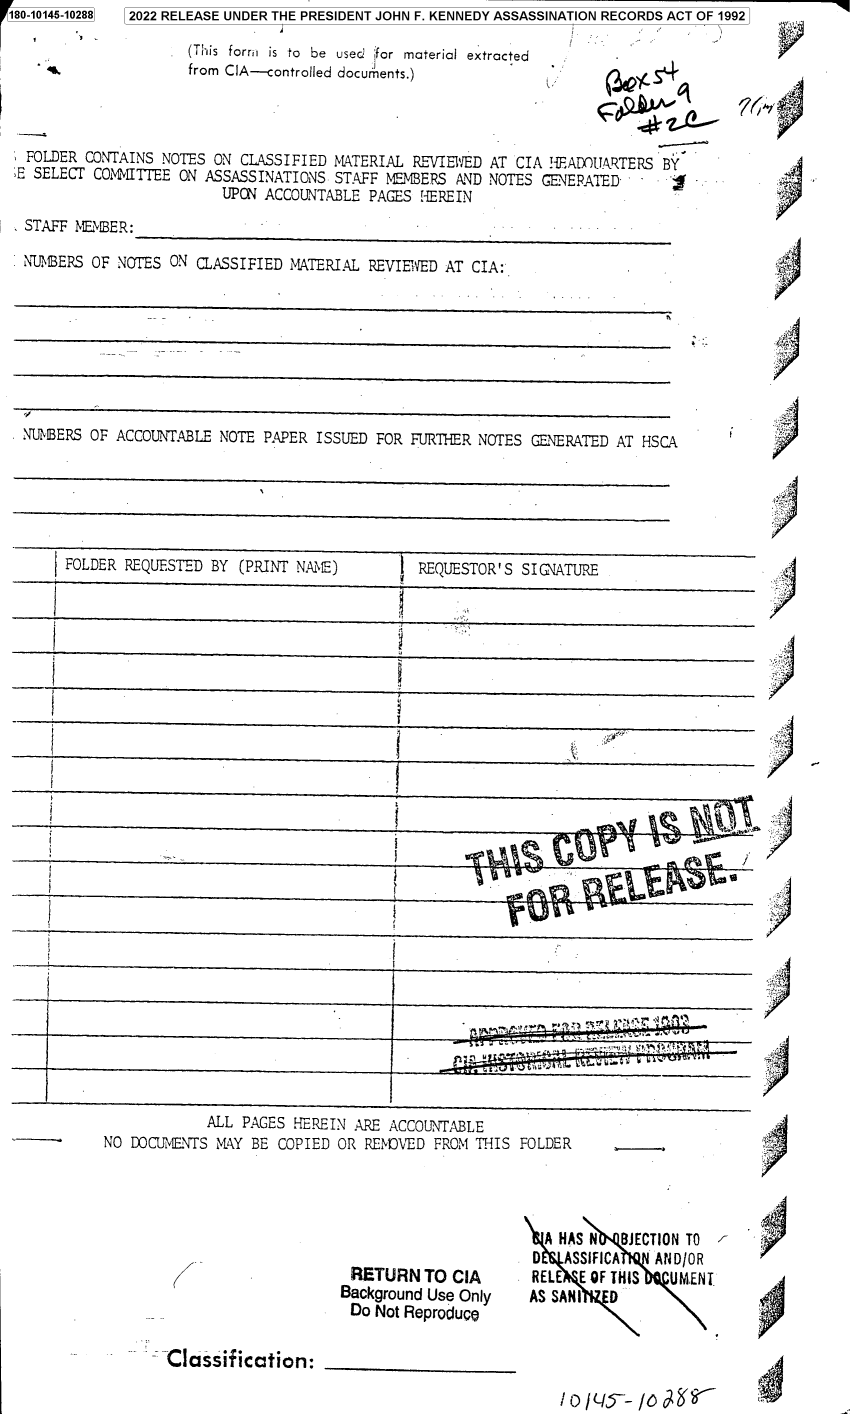 handle is hein.jfk/jfkarch82844 and id is 1 raw text is: 180-10145-10288

2022 RELEASE UNDER THE PRESIDENT JOHN F. KENNEDY ASSASSINATION RECORDS ACT OF 1992

(This form is to be used jfor material extracted
from CIA-controlled docurments.)

(*LS4~

FOLDER CONTAINS NOTES ON CLASSIFIED MATERIAL REVIEWED AT CIA H{EADOUARTERS BY
E SELECT COMMITTEE ON ASSASSINATIONS STAFF MEMBERS AND NOTES GENERATED -
UPON ACCOUNTABLE PAGES HEREIN
STAFF MEMBER:
NUMBERS OF NOTES ON CLASSIFIED MATERIAL REVIEWED AT CIA:

NUMBERS OF ACCOUNTABLE NOTE PAPER ISSUED FOR FURTHER NOTES GENERATED AT HSCA

FOLDER REQUESTED BY (PRINT NAME)         REQUESTOR'S SIGNATURE
V-

ALL PAGES HEREIN ARE ACCOUNTABLE
NO DOCUMENTS MAY BE COPIED OR RENOVED FROM THIS

J                                                                             I

)

FOLDER

RETURN TO CIA
Background Use Only
Do Not Reproduce

Classification:

A HAS N BJlECTION TO
0   ASSIFICA   AND/OR
RELE E OF THIS   UMENT
AS SANI   D

.4

r I
)h'

4

/)
/~

i  .


